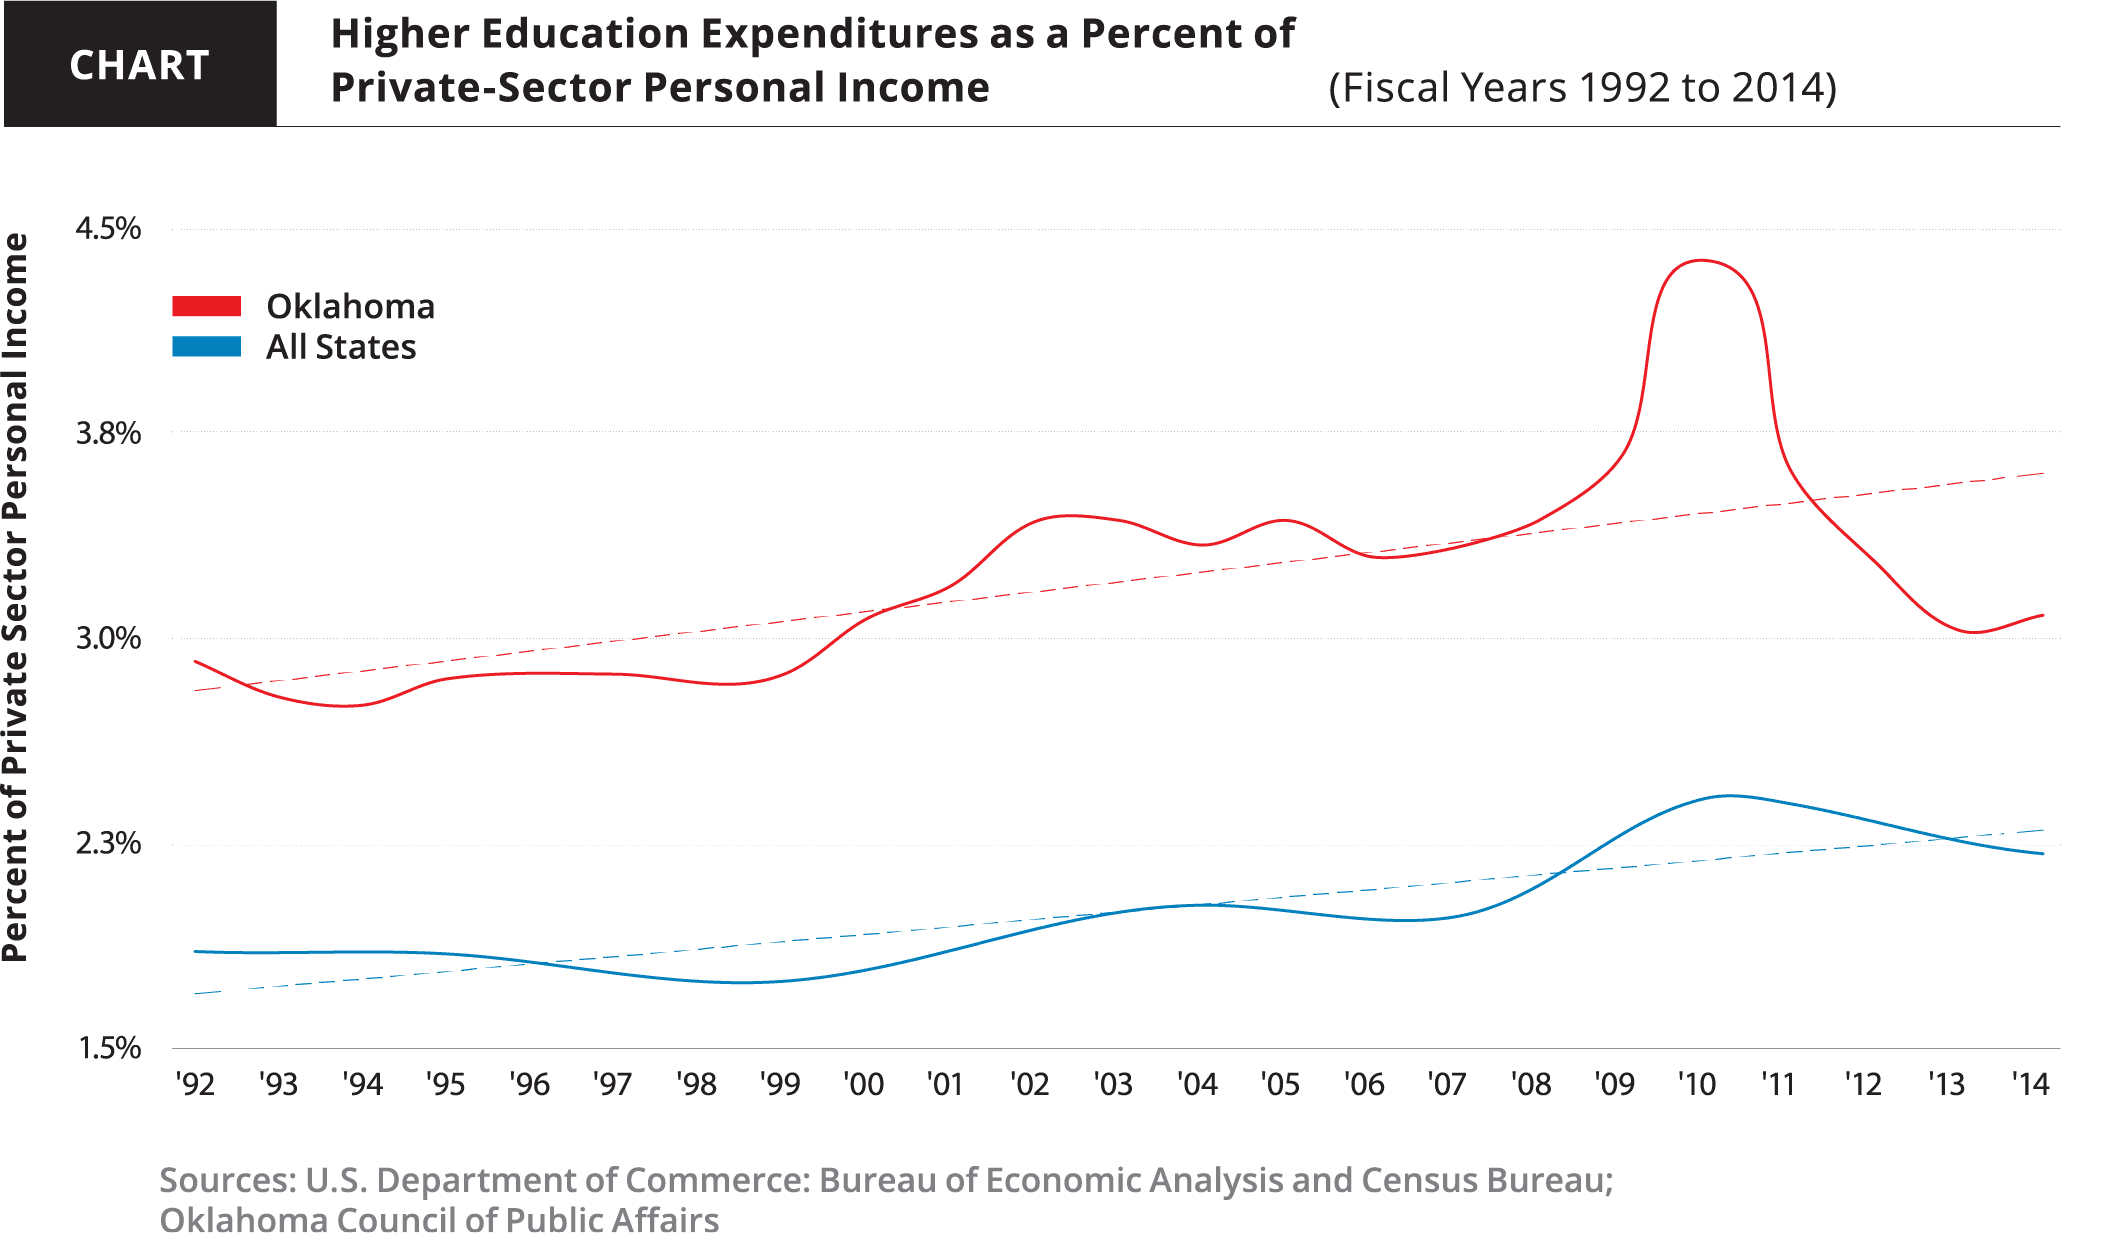 Higher-Ed-Expenditures-as-a-Percent-of-Private-Sector-Personal-Income-07-1.png#asset:172